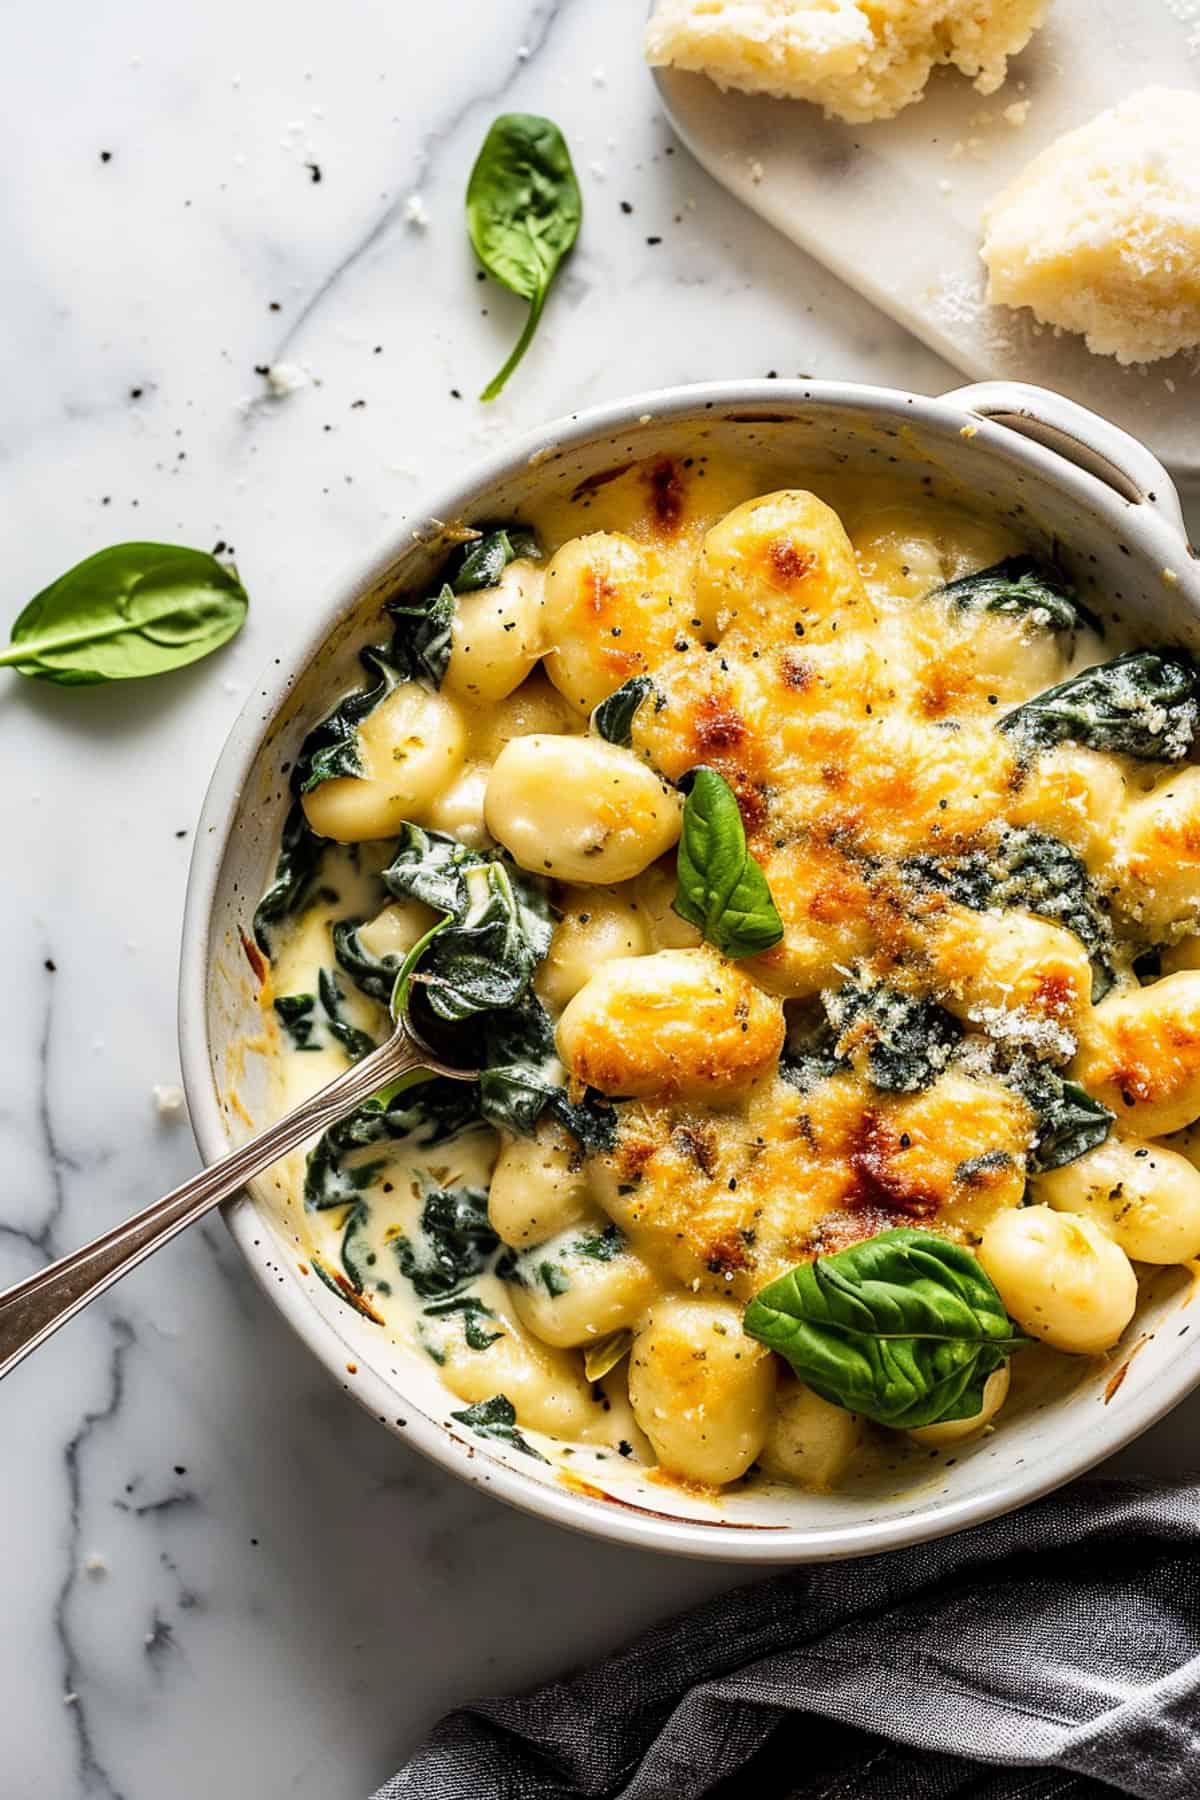 Spinach and artichoke gnocchi baked with cheese and pesto.